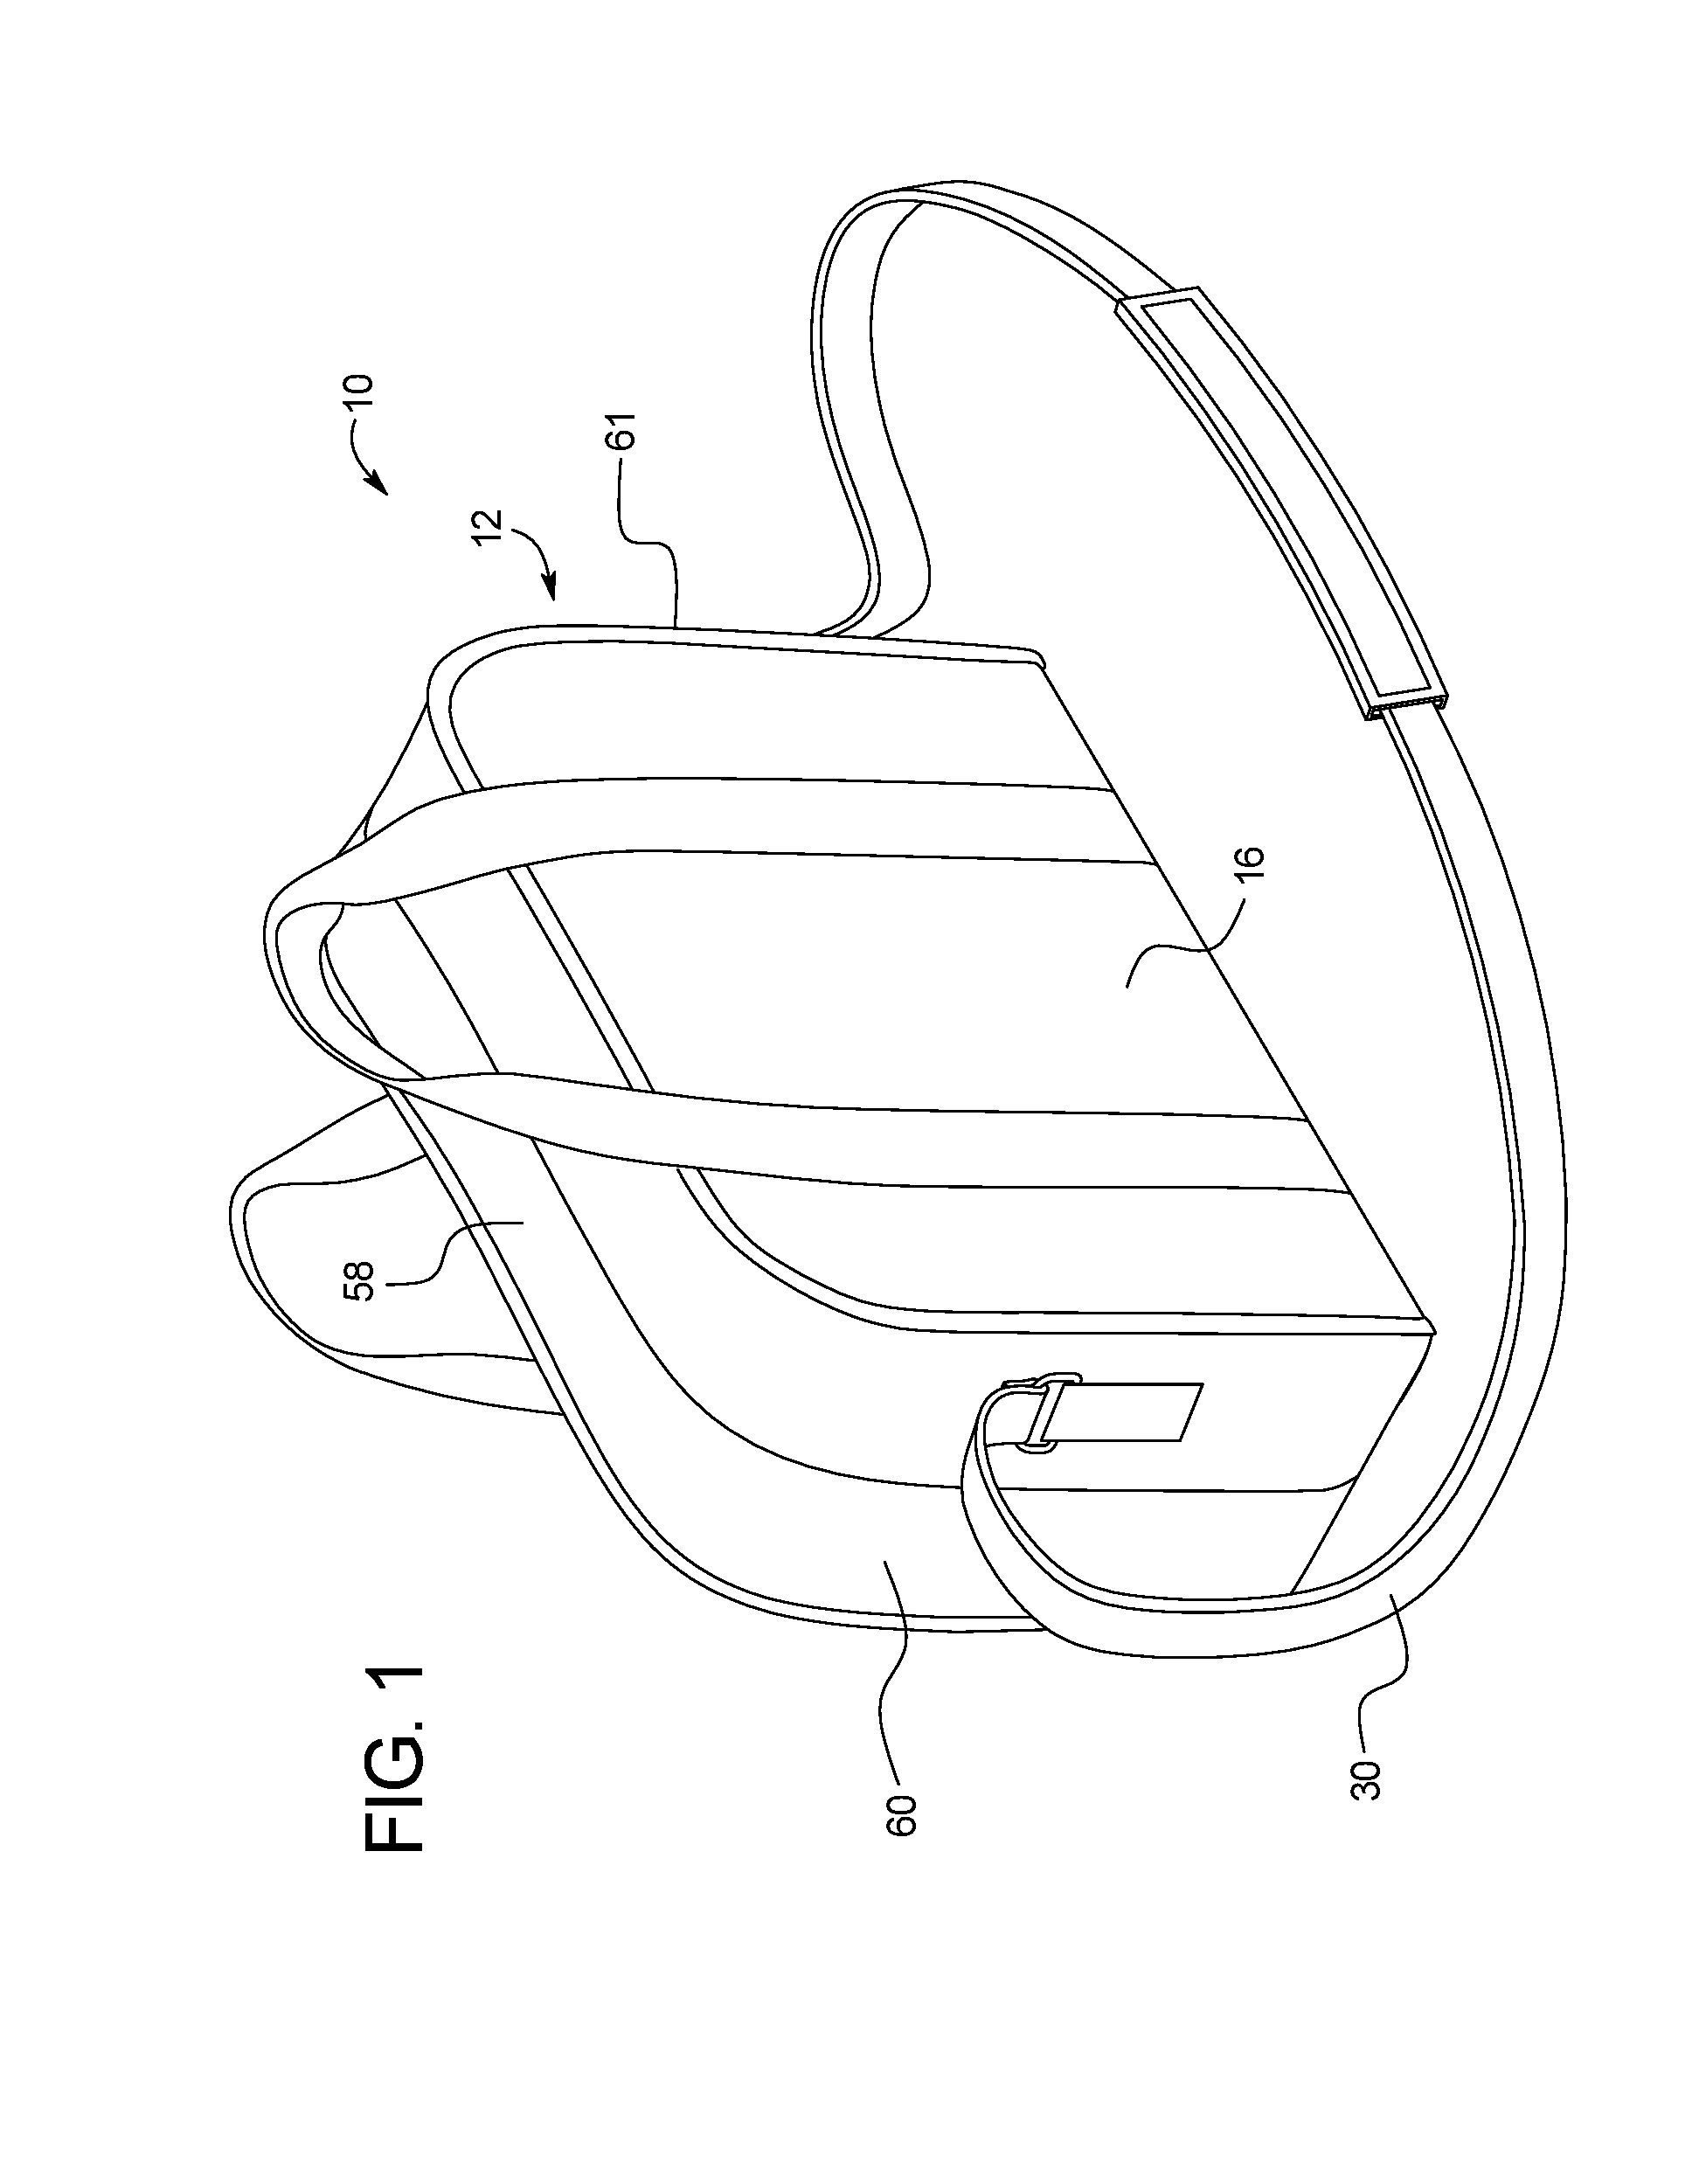 Method of Using a Convertible Diaper Changing Bag